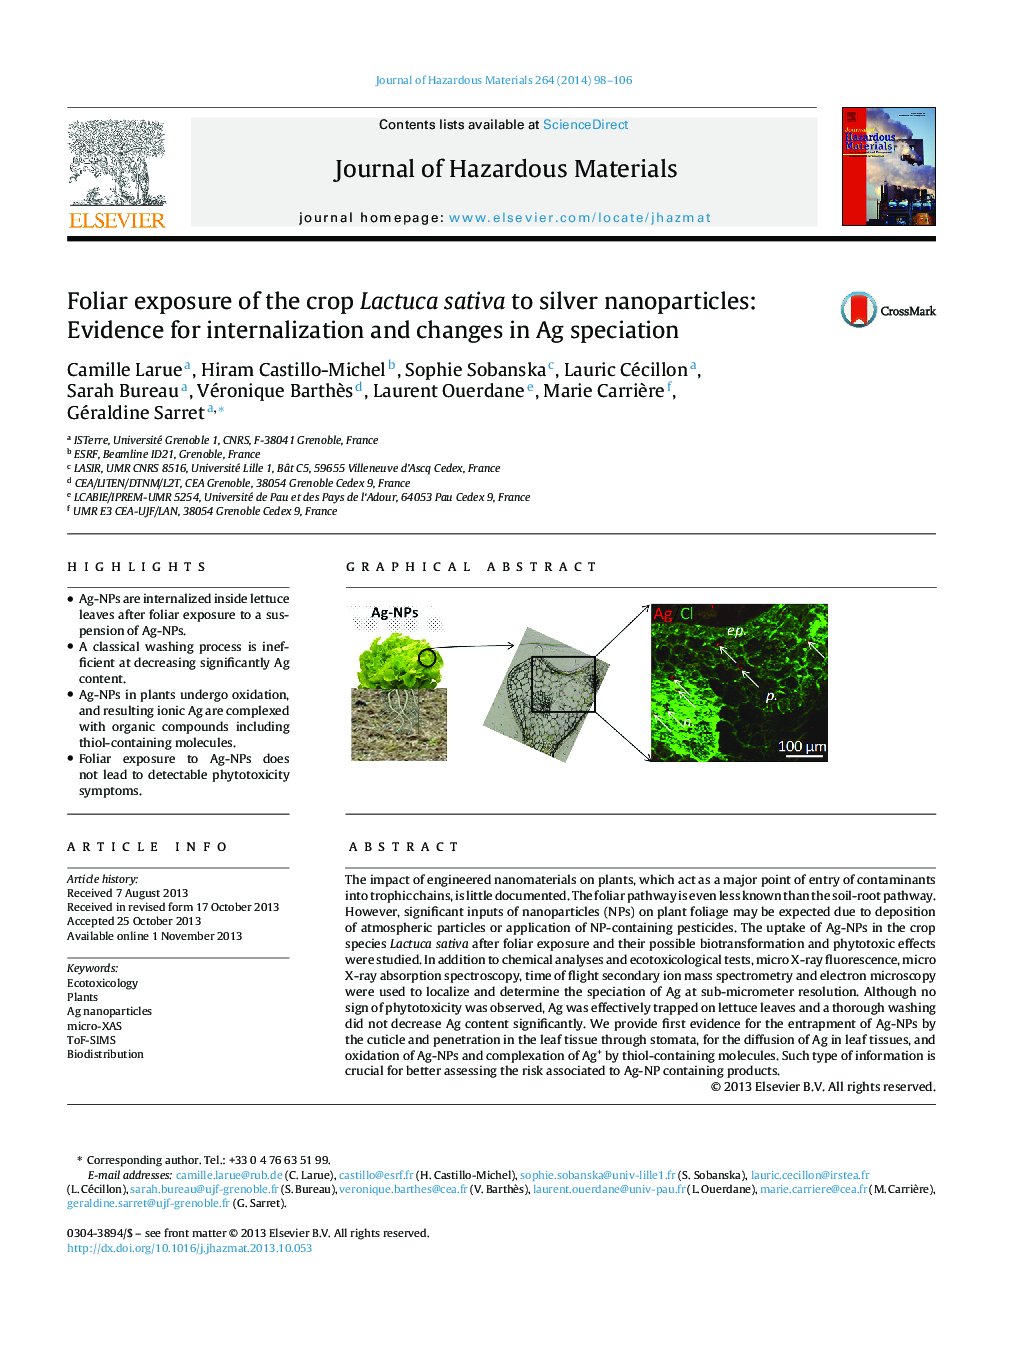 Foliar exposure of the crop Lactuca sativa to silver nanoparticles: Evidence for internalization and changes in Ag speciation